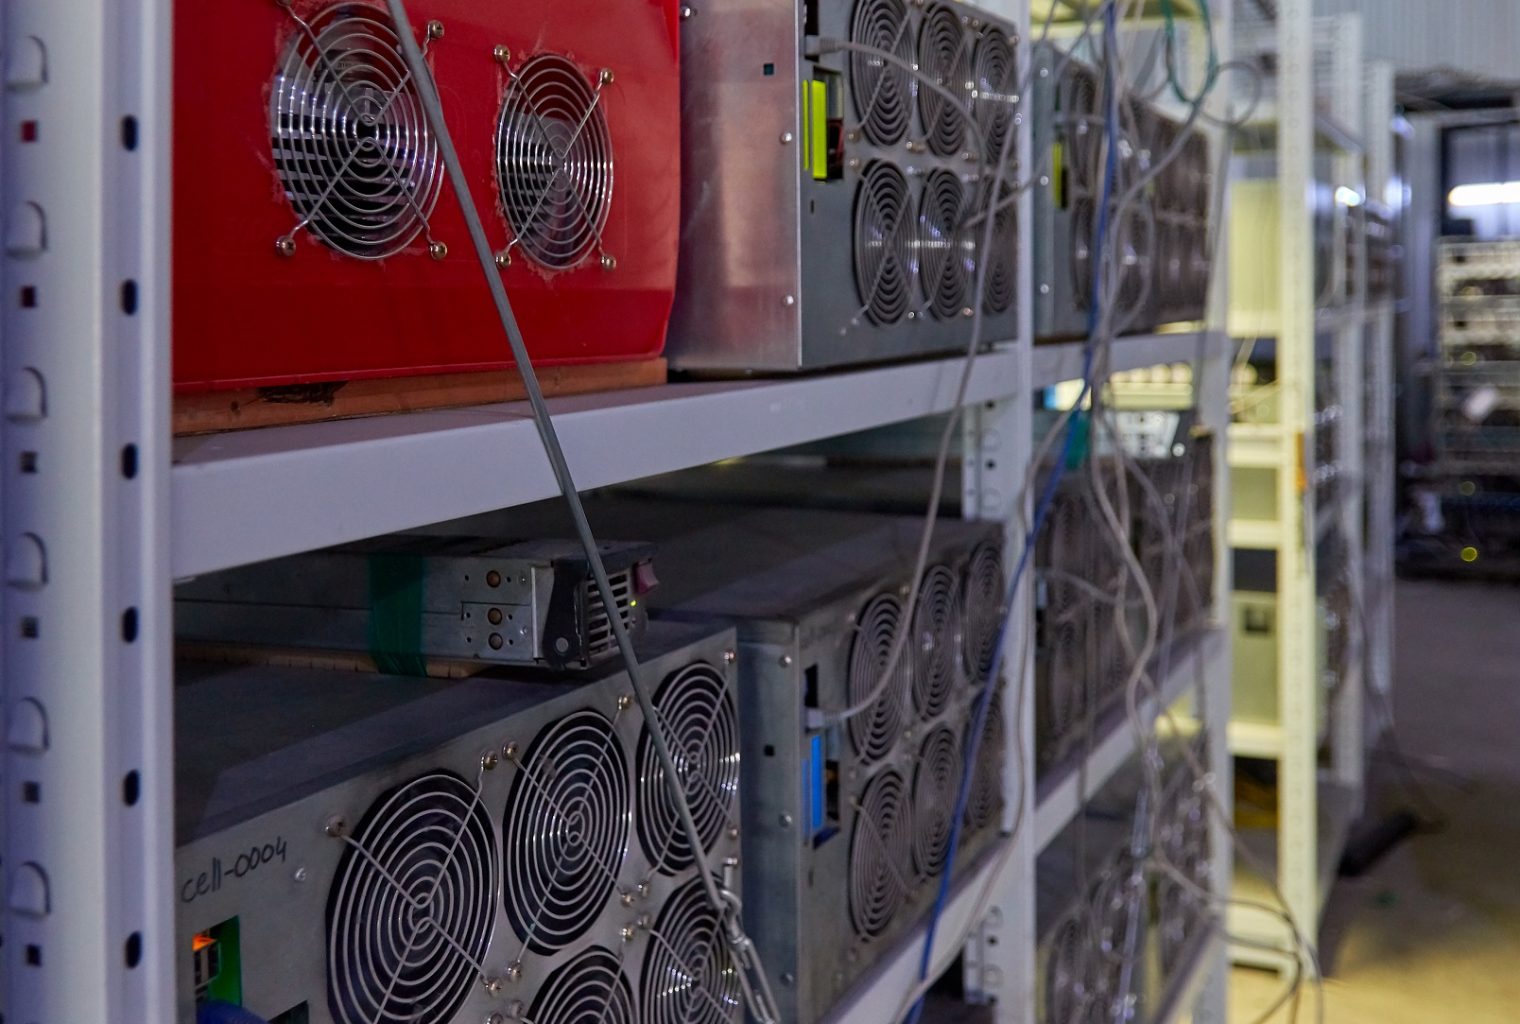 China Removes Bitcoin Mining From Unwanted Industries List